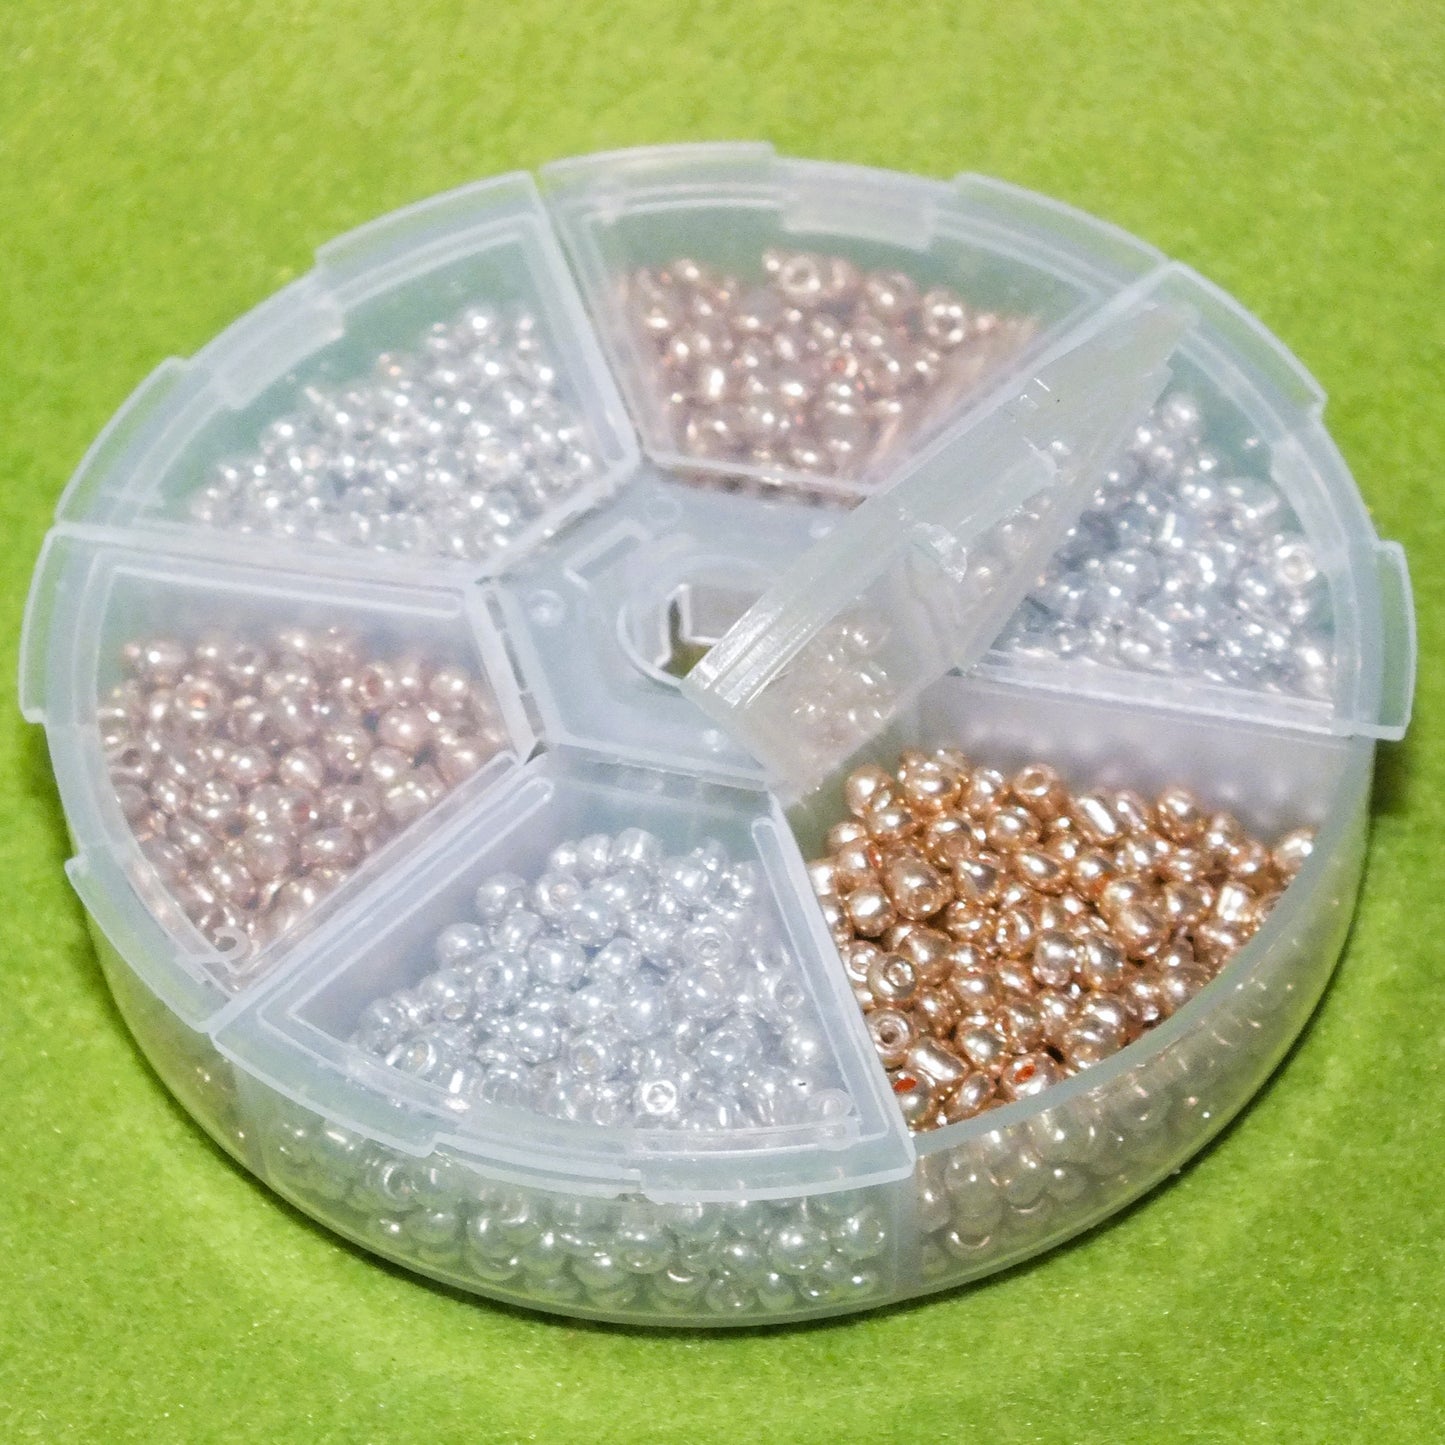 3mm metallic silver & gold seed bead selection box - silver, gold